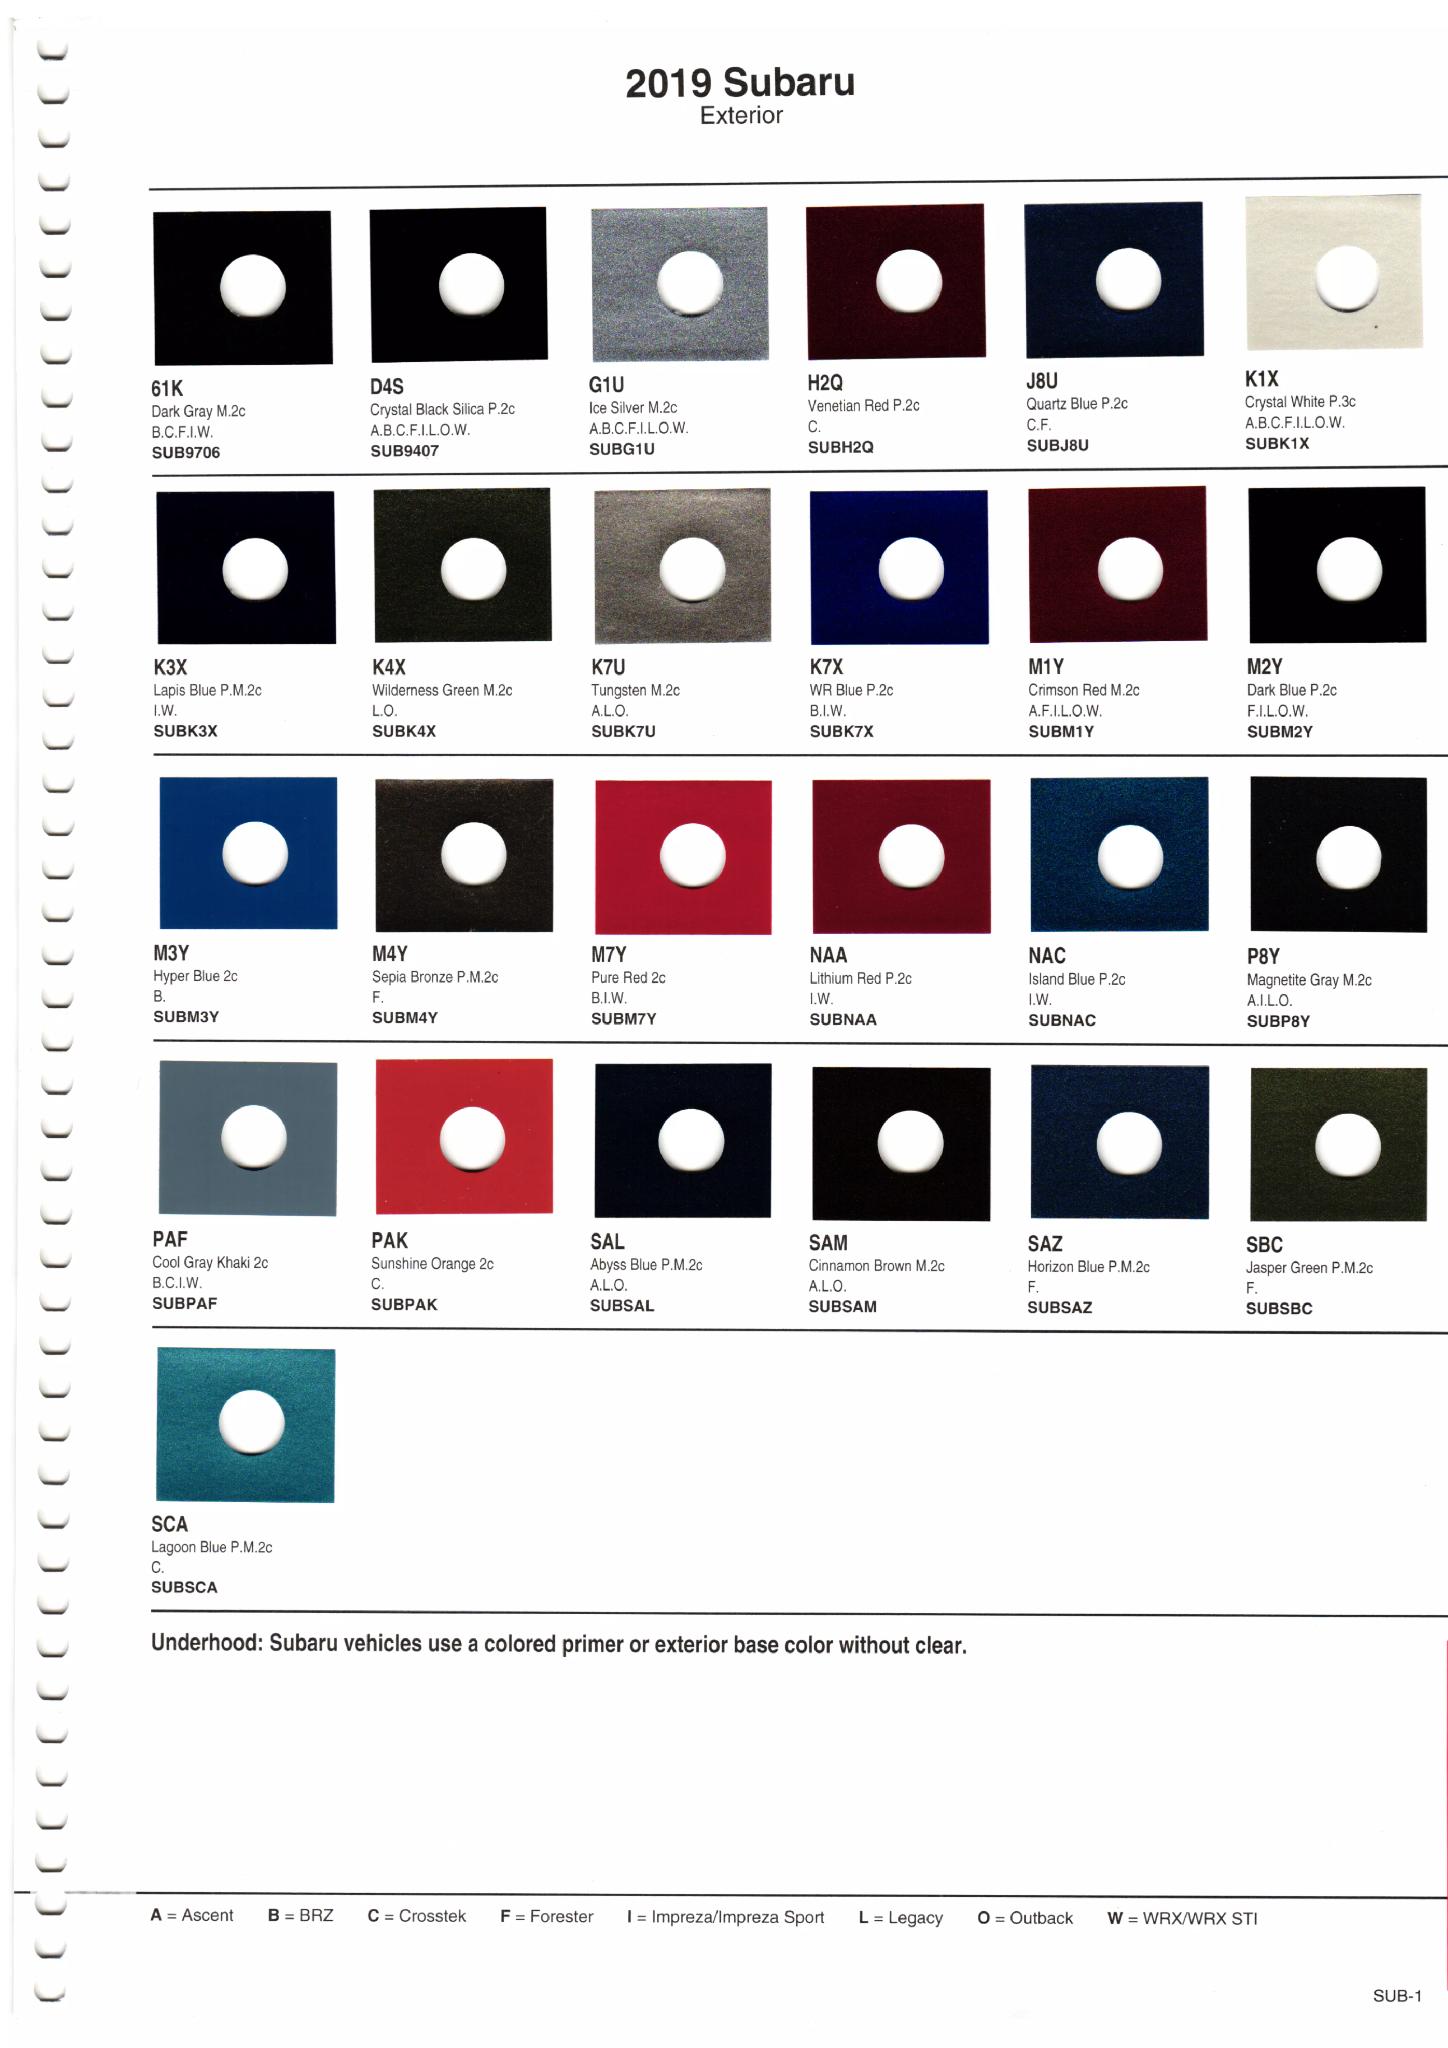 Paint codes for the exterior Color of  subaru vehicles in 2019